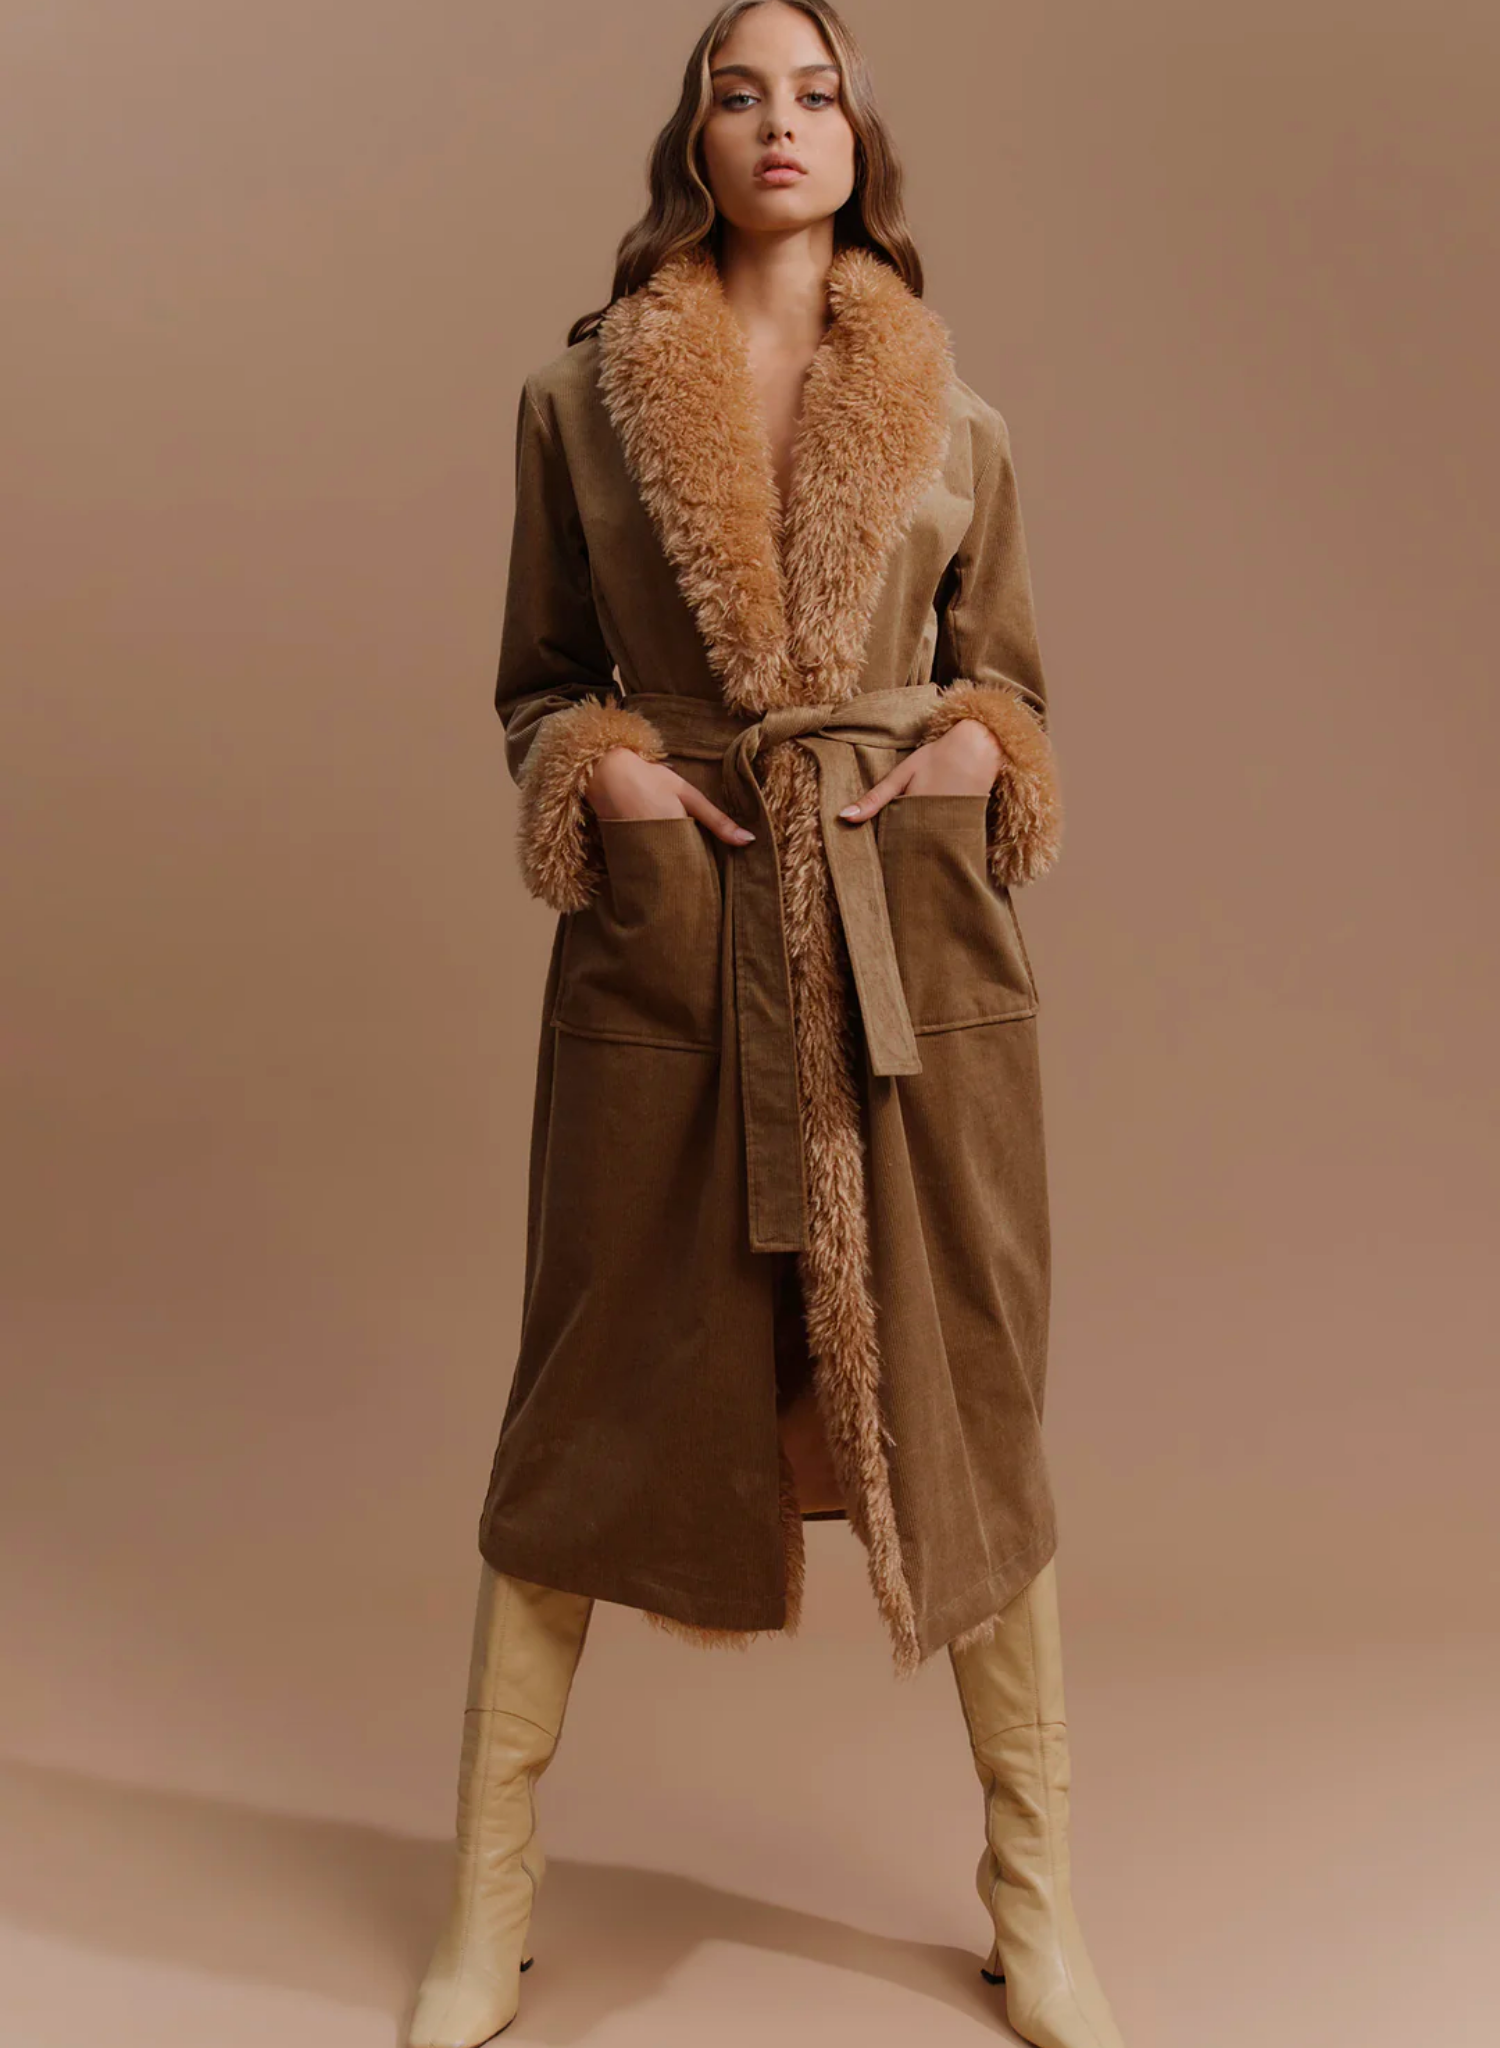 The Heaven Coat is our statement fur trim penny lane coat. The long-line fit is complimented by a fur collar and cuffs. The jacket can be cinched in at the waist with the matching belt or worn open over your favourite dress. Pair with your favourite boots and you are ready for this winter season.